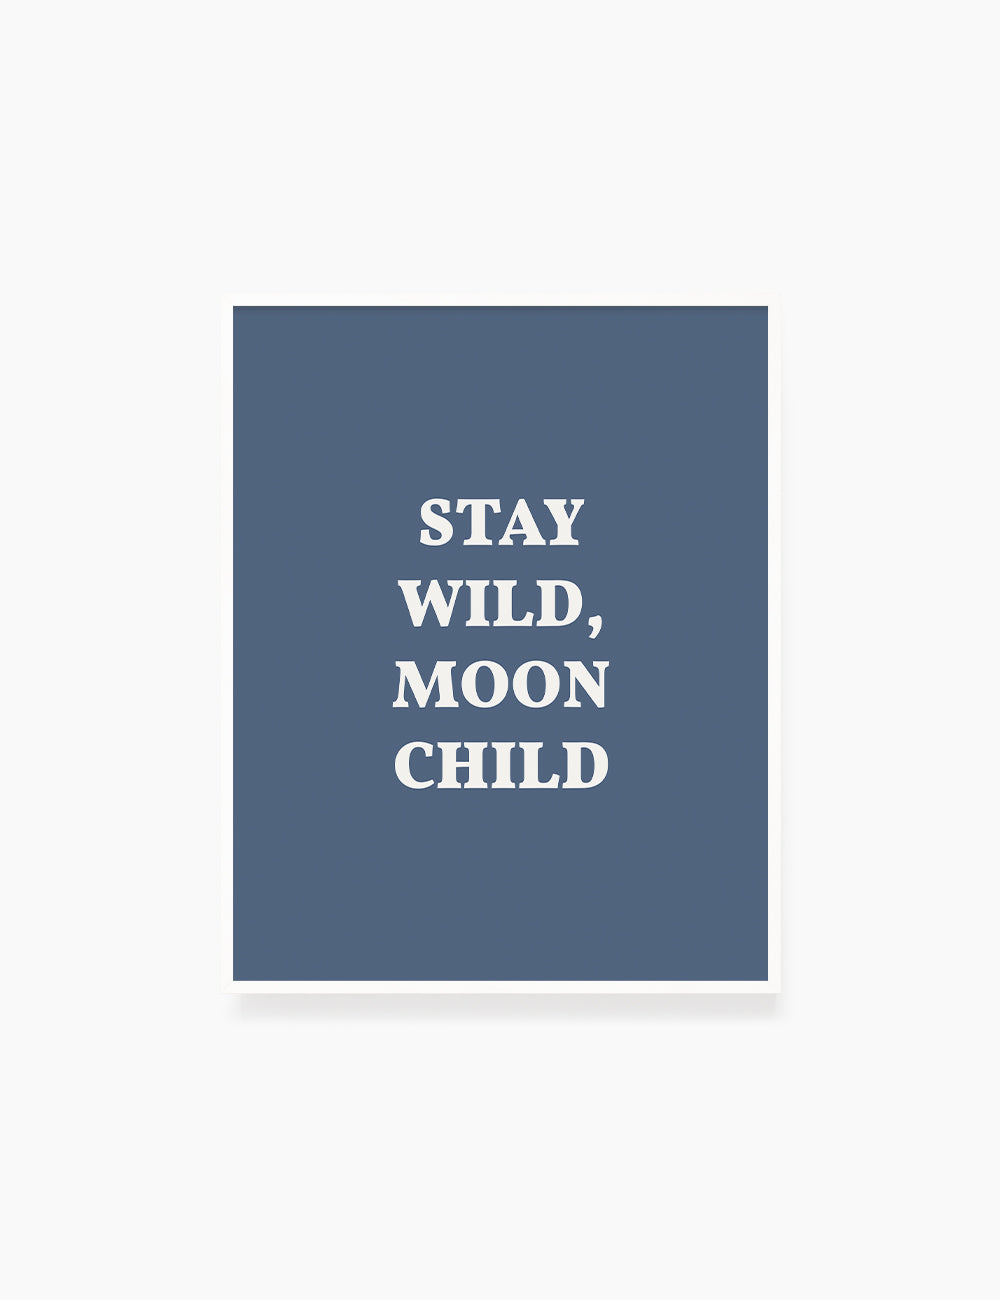 STAY, WILD, MOON CHILD. Moonchild Quote. Blue. Printable Wall Art Quote. - PAPER MOON Art & Design